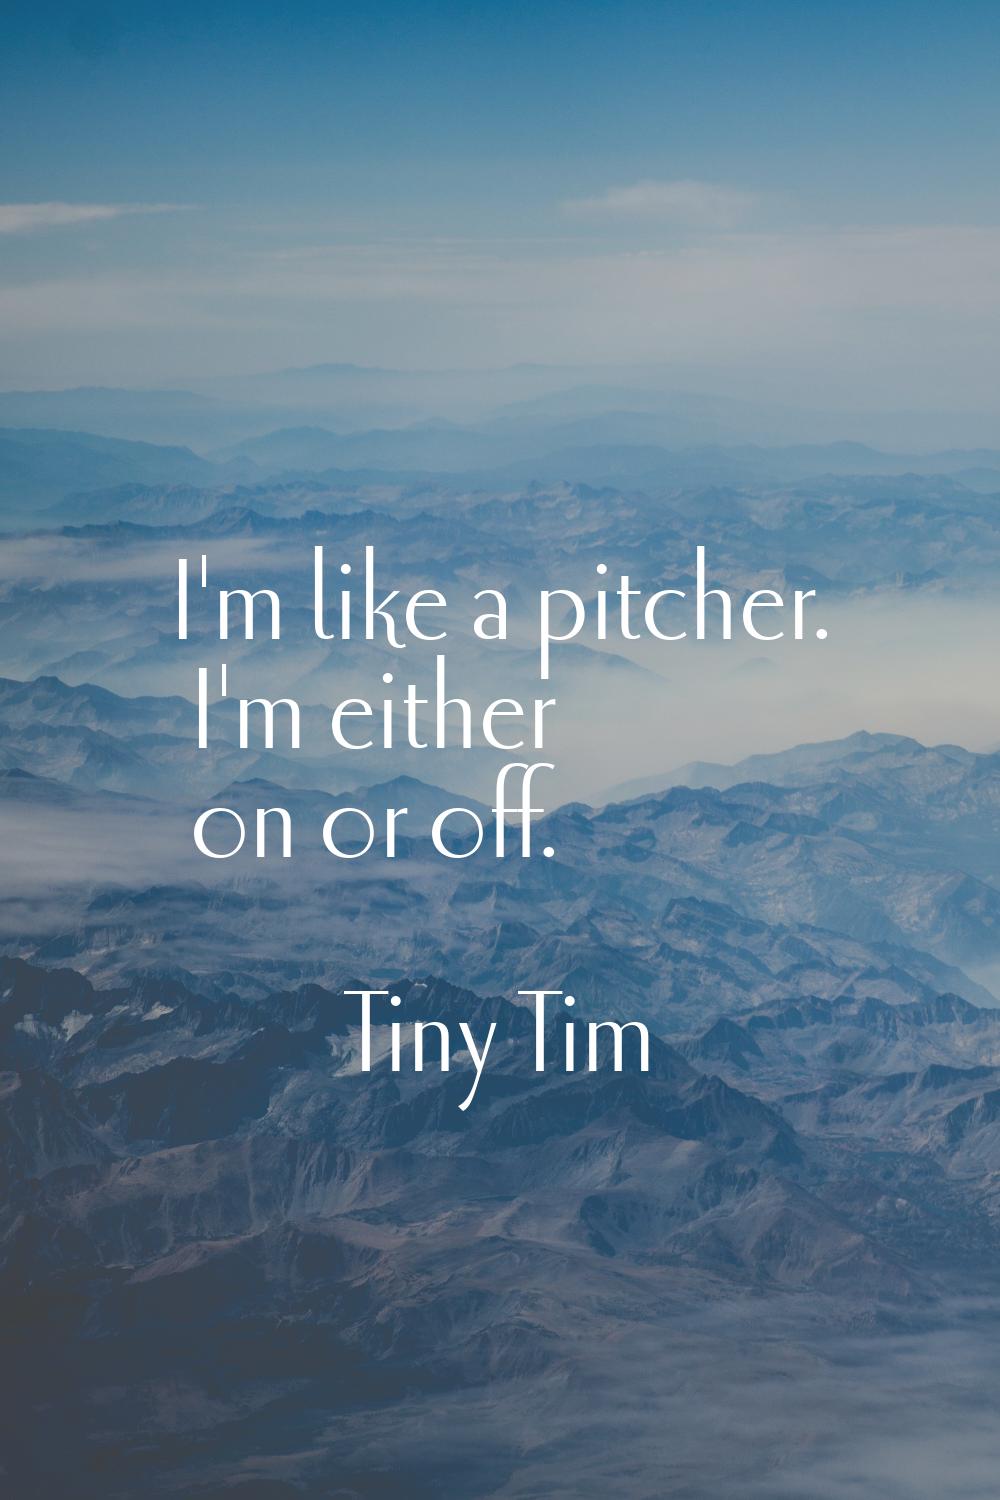 I'm like a pitcher. I'm either on or off.